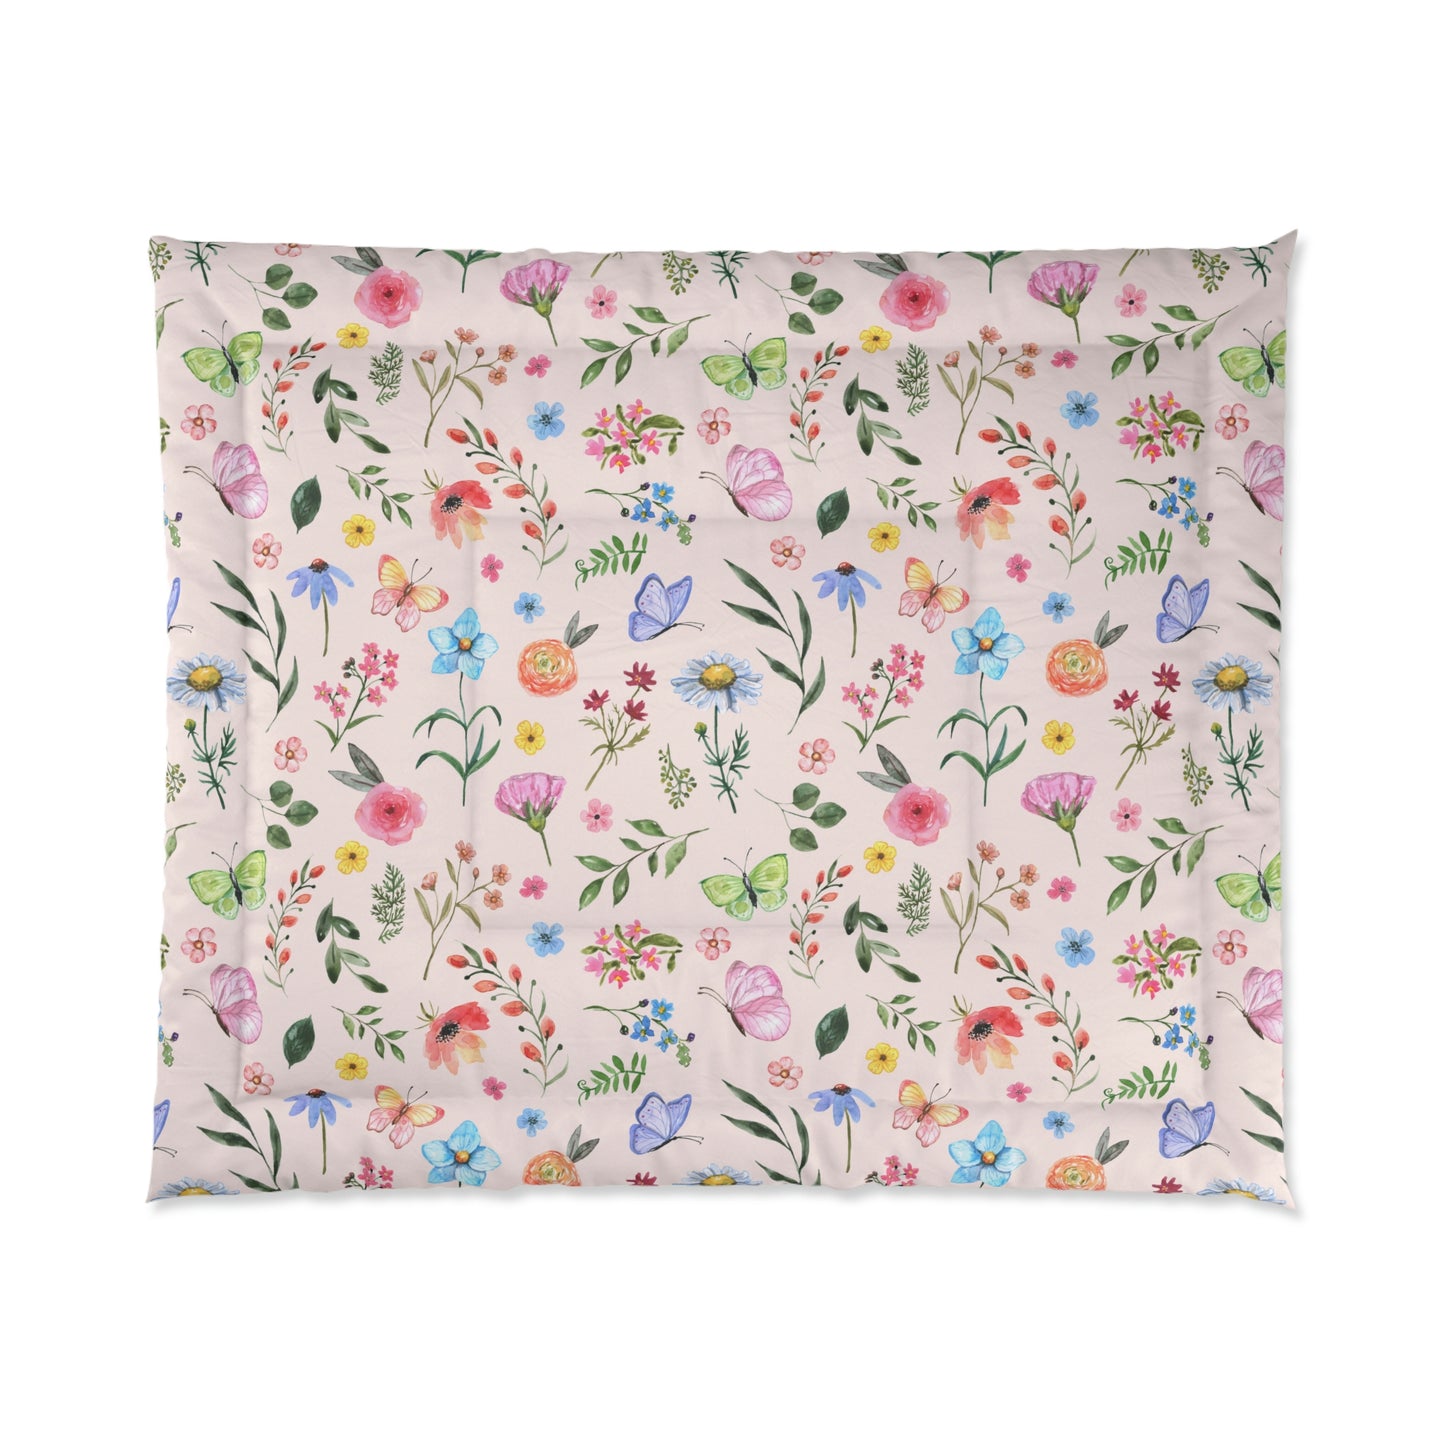 Spring Daisies and Butterflies Comforter